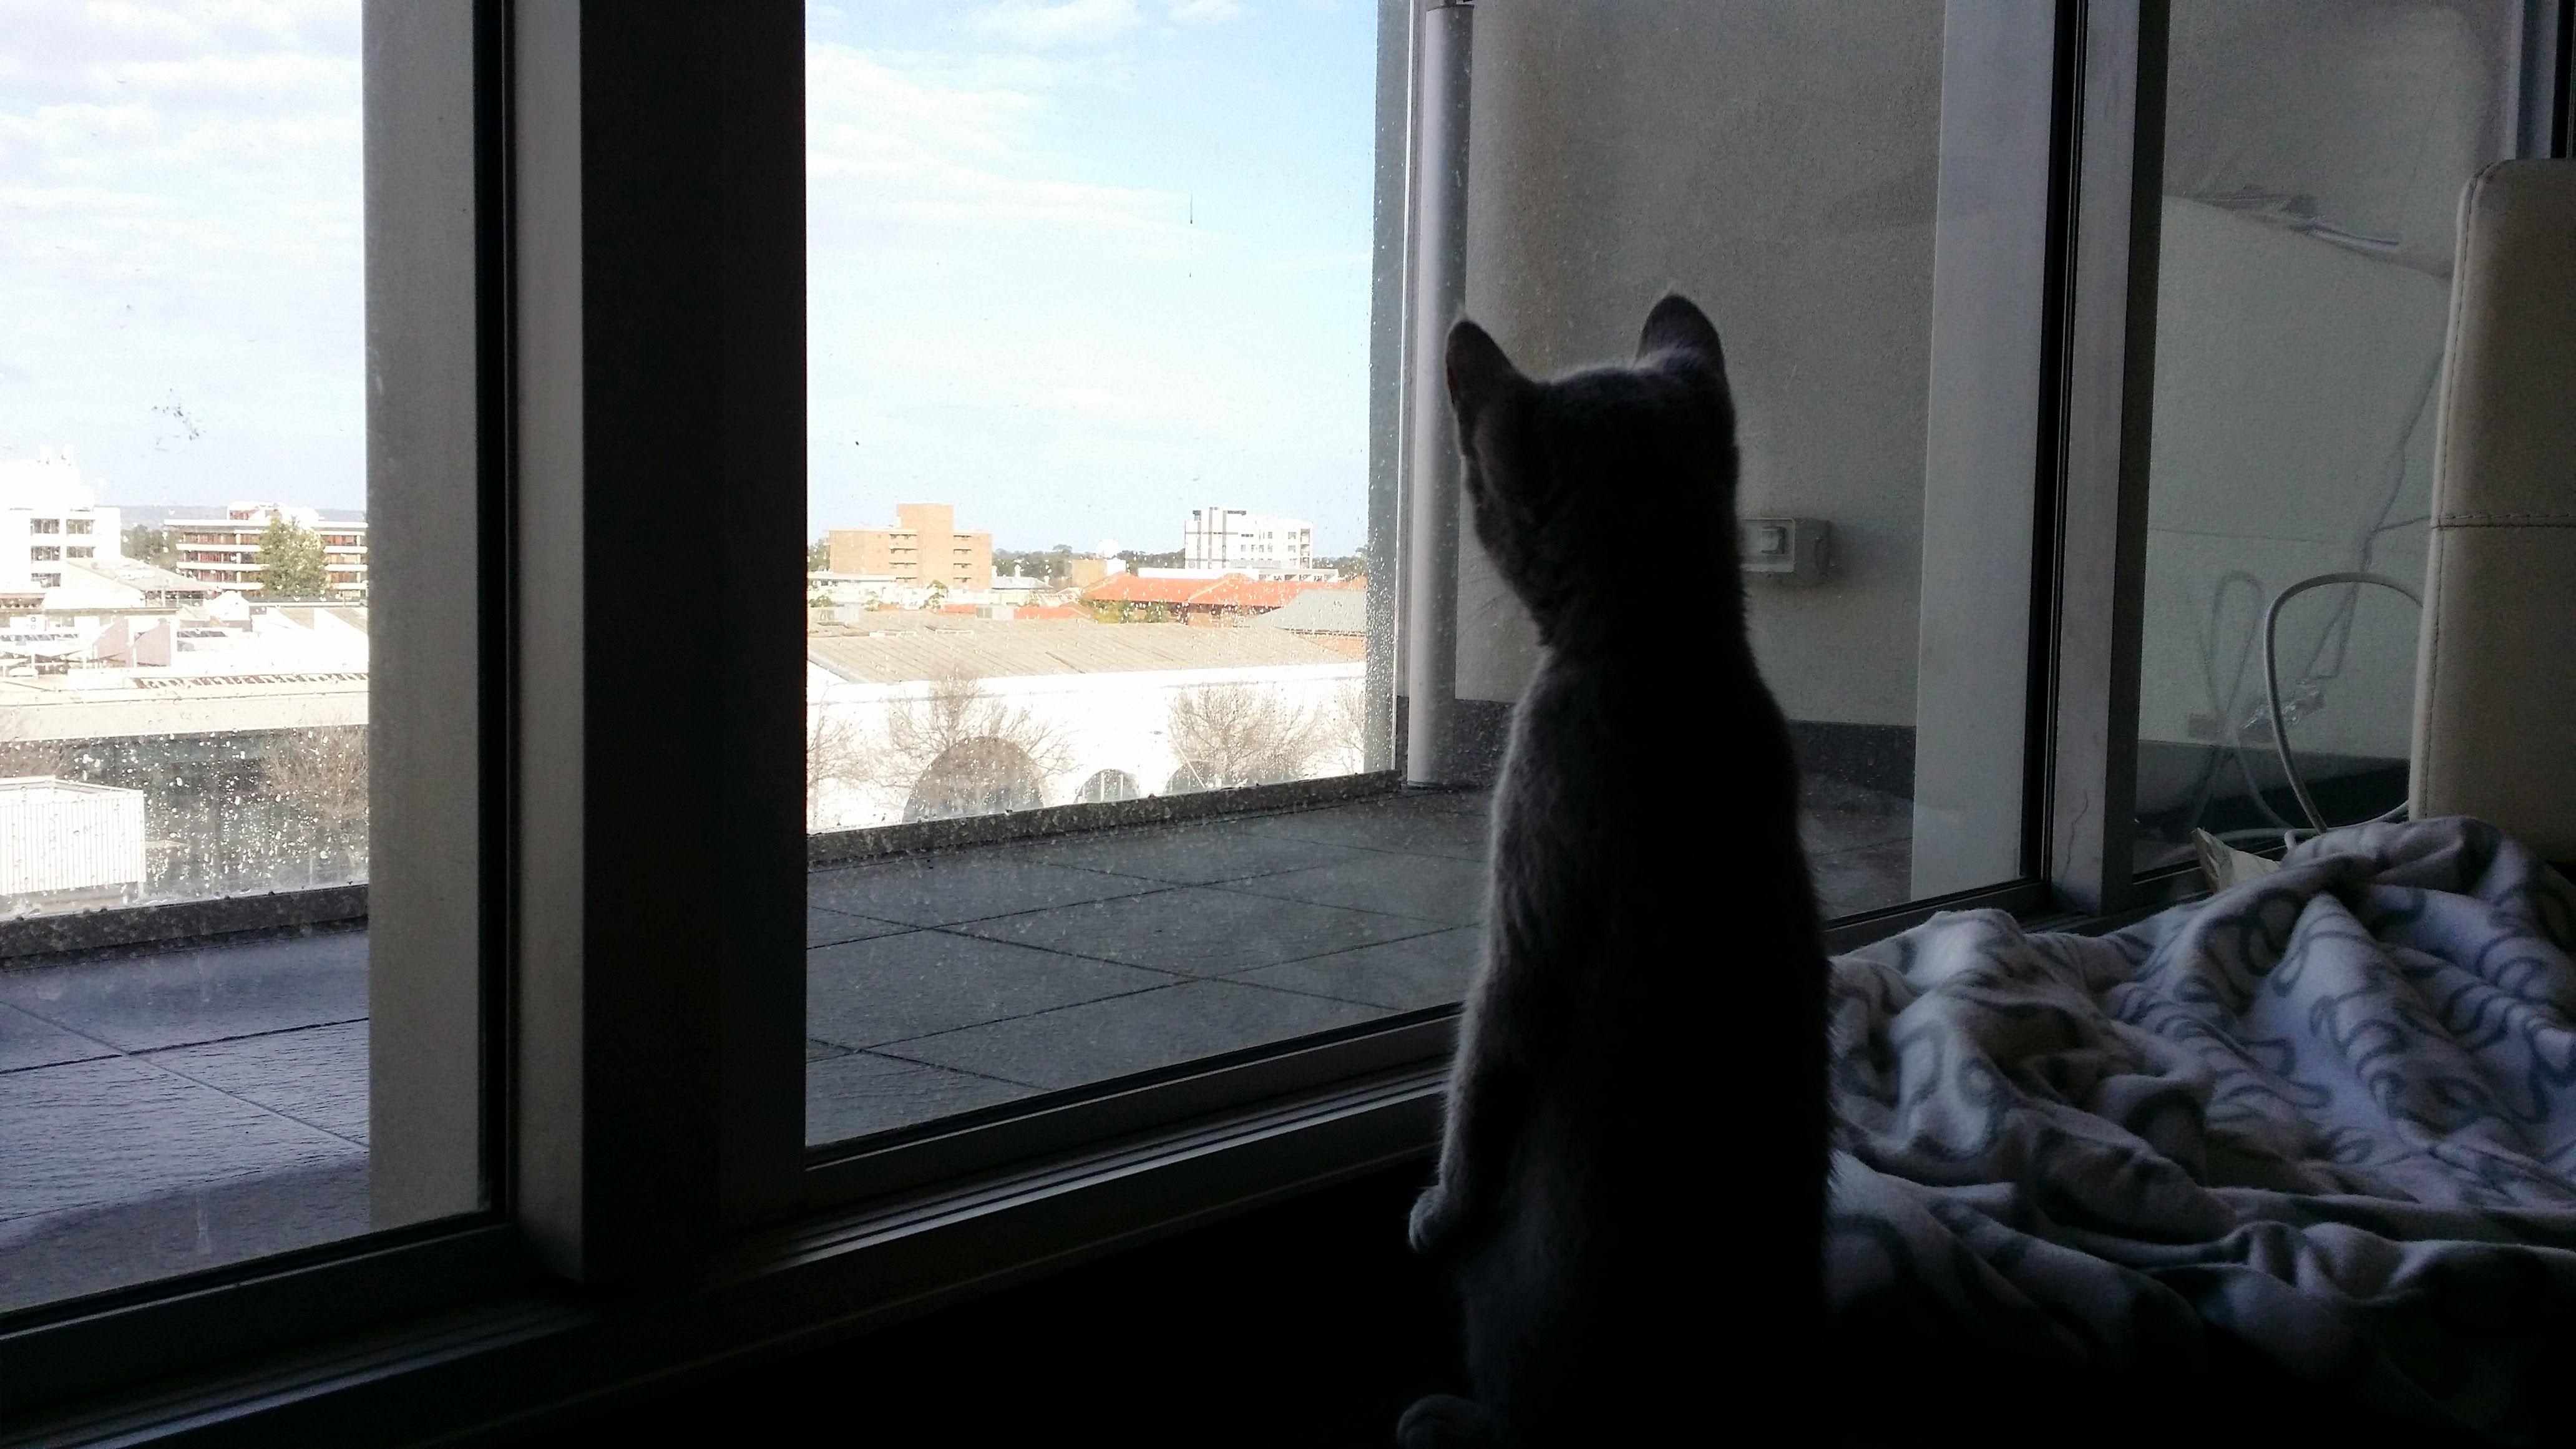 A kitten version of Arya standing like a meerkat peering out an apartment window.